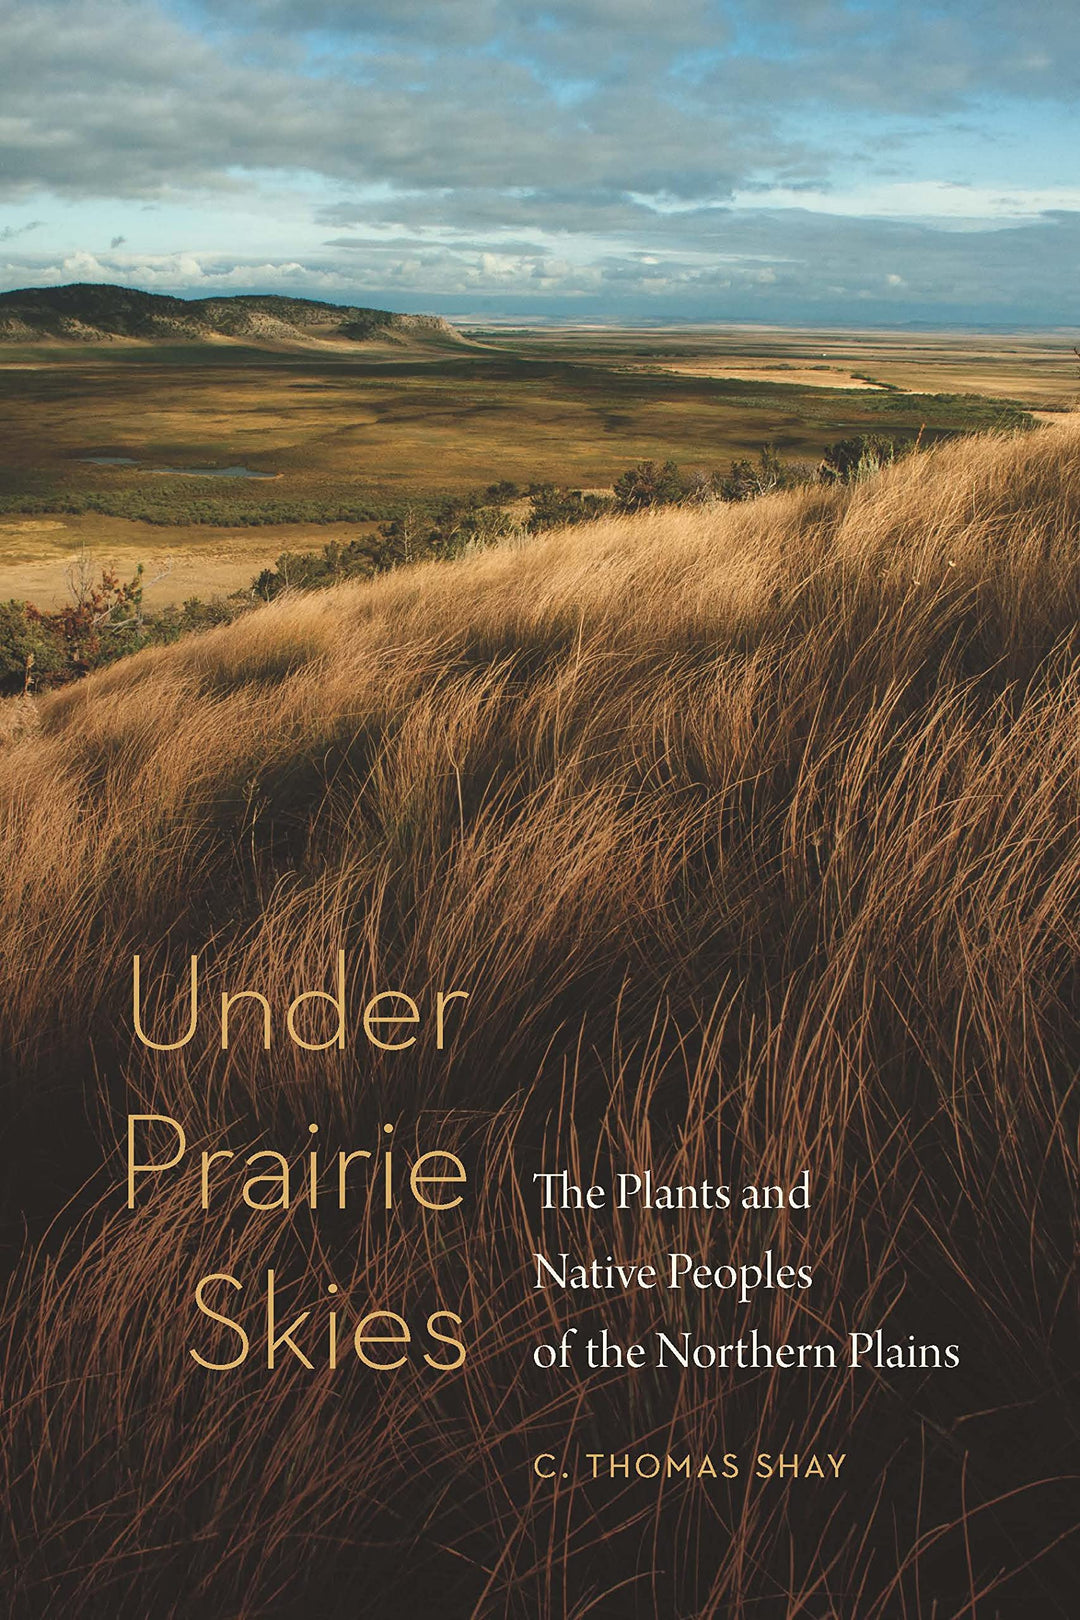 Under Prairie Skies: The Plants and Native Peoples of the Northern Plains by C. Thomas Shay